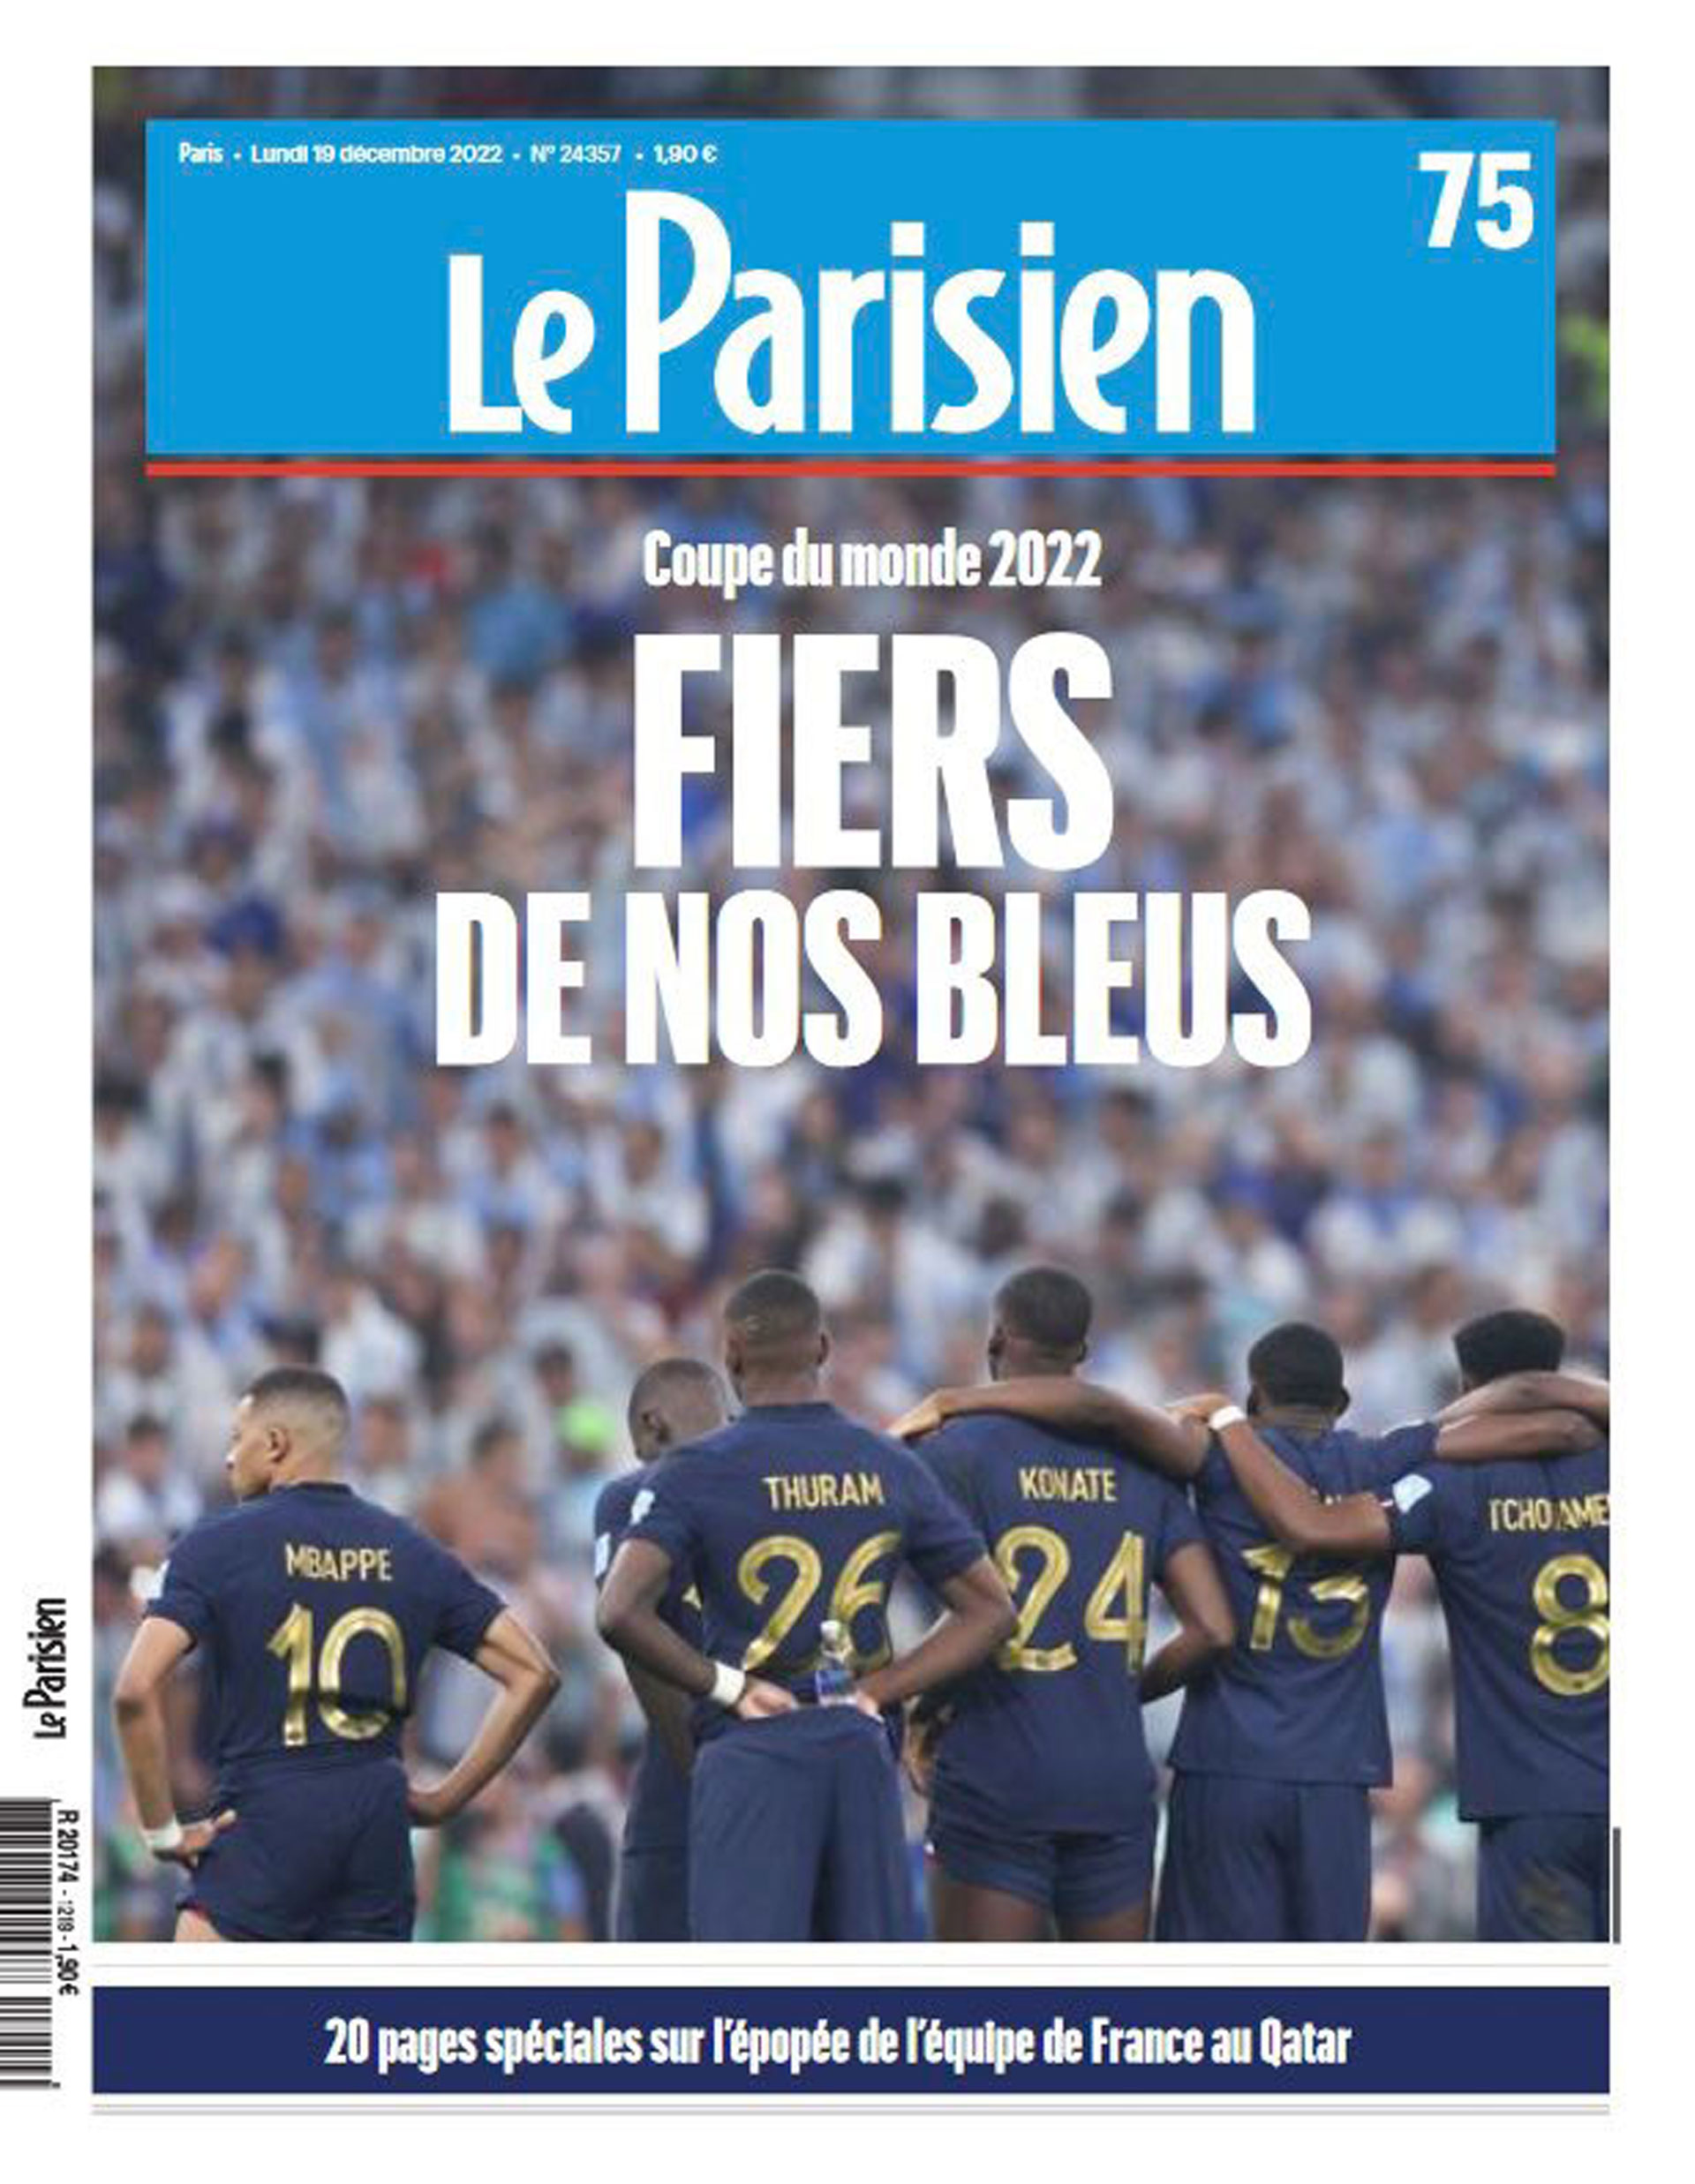 Pride as the insignia of Le Parisien for the new runners-up in the world